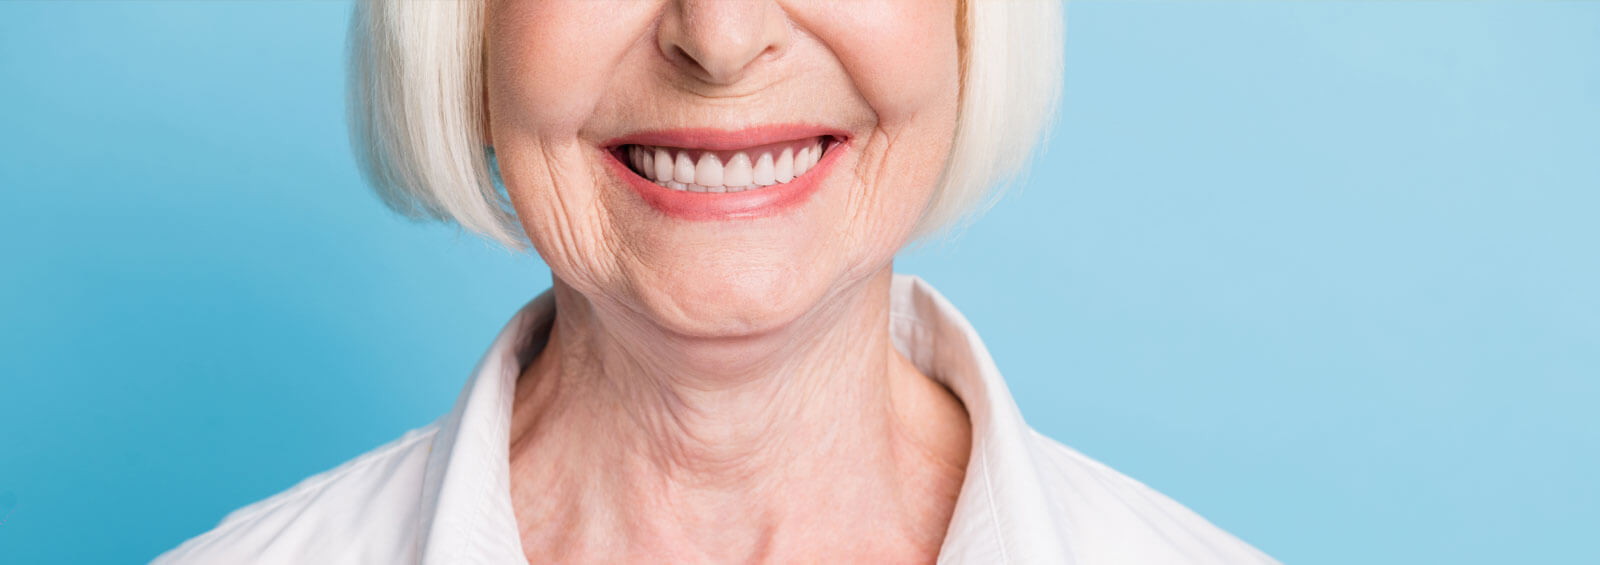 Woman With Partial Dentures